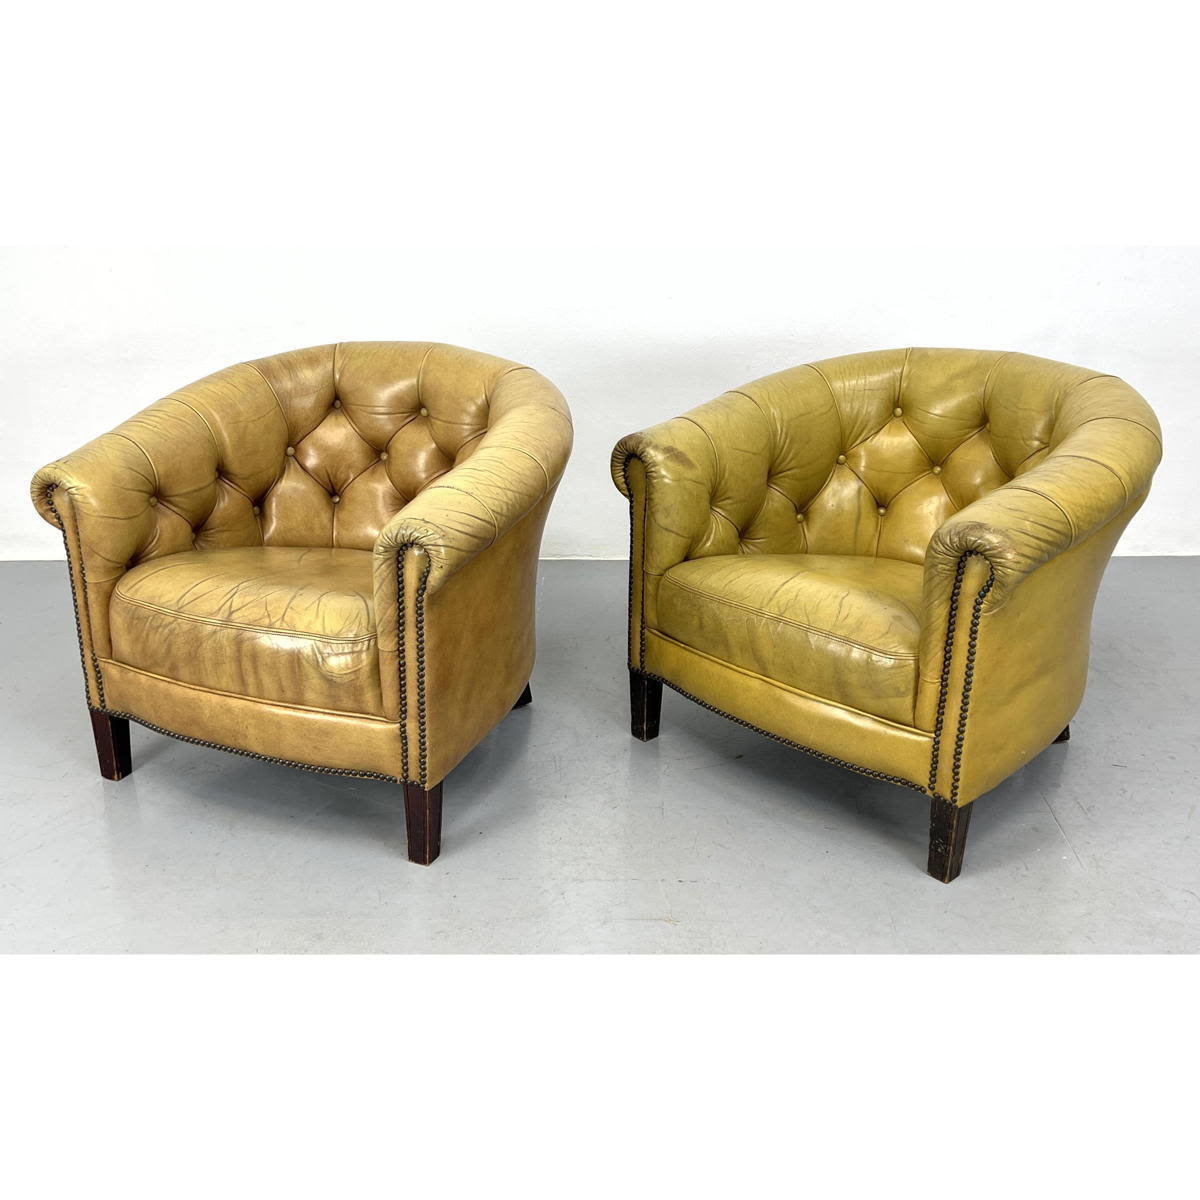 Pr Golden Tan Leather Chesterfield 2a779f